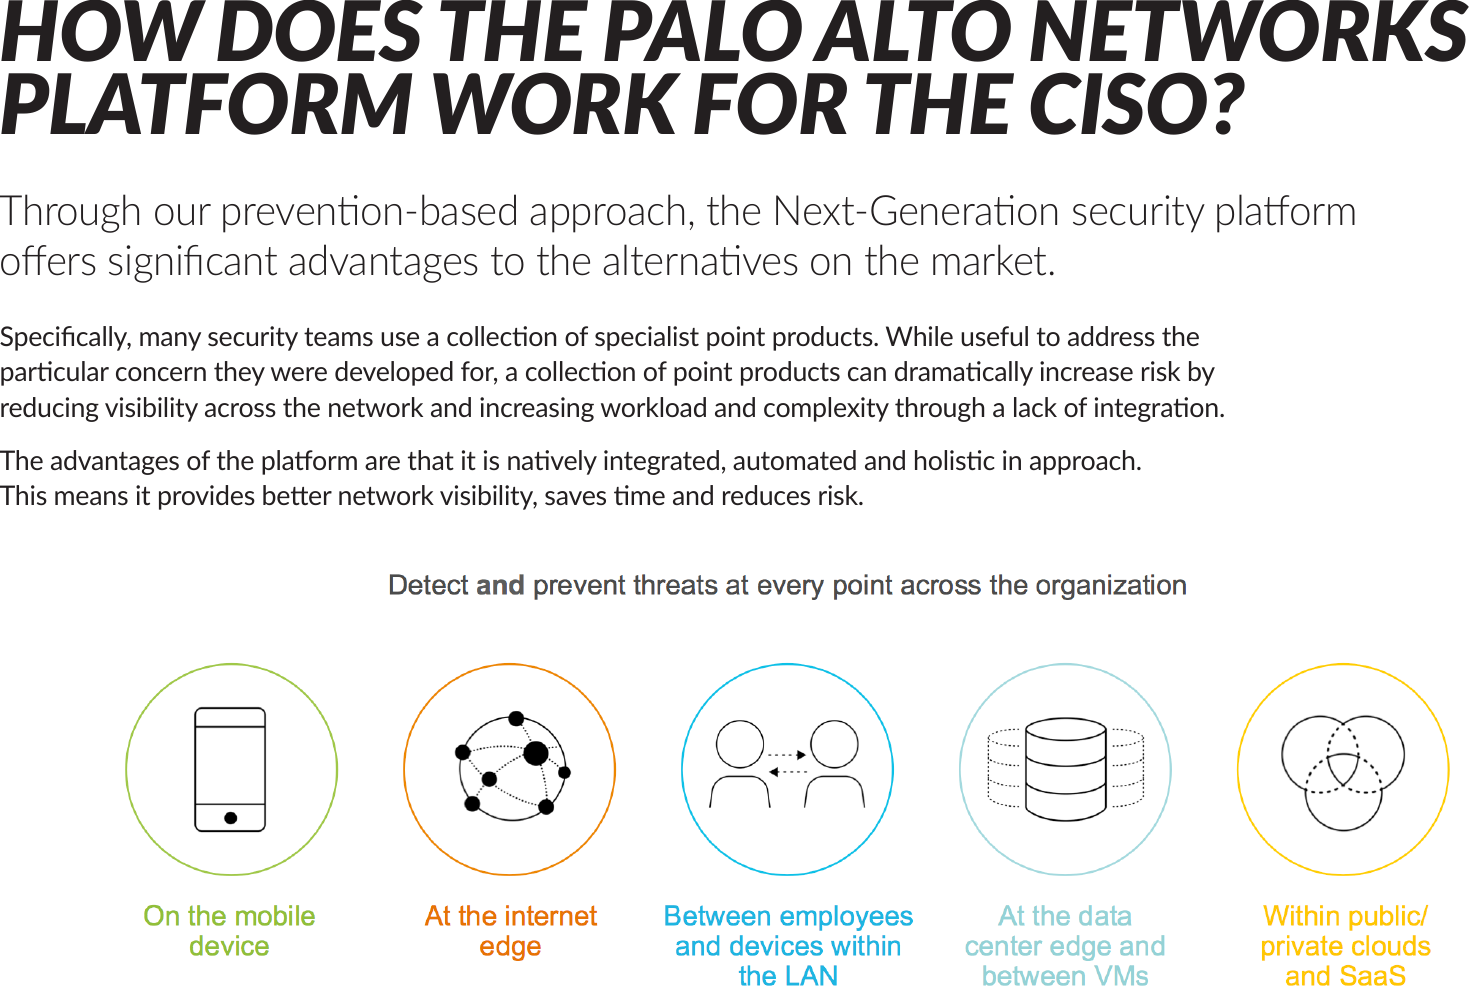 Page 6 of 9 - How-to-guide-palo-alto-networks-platform